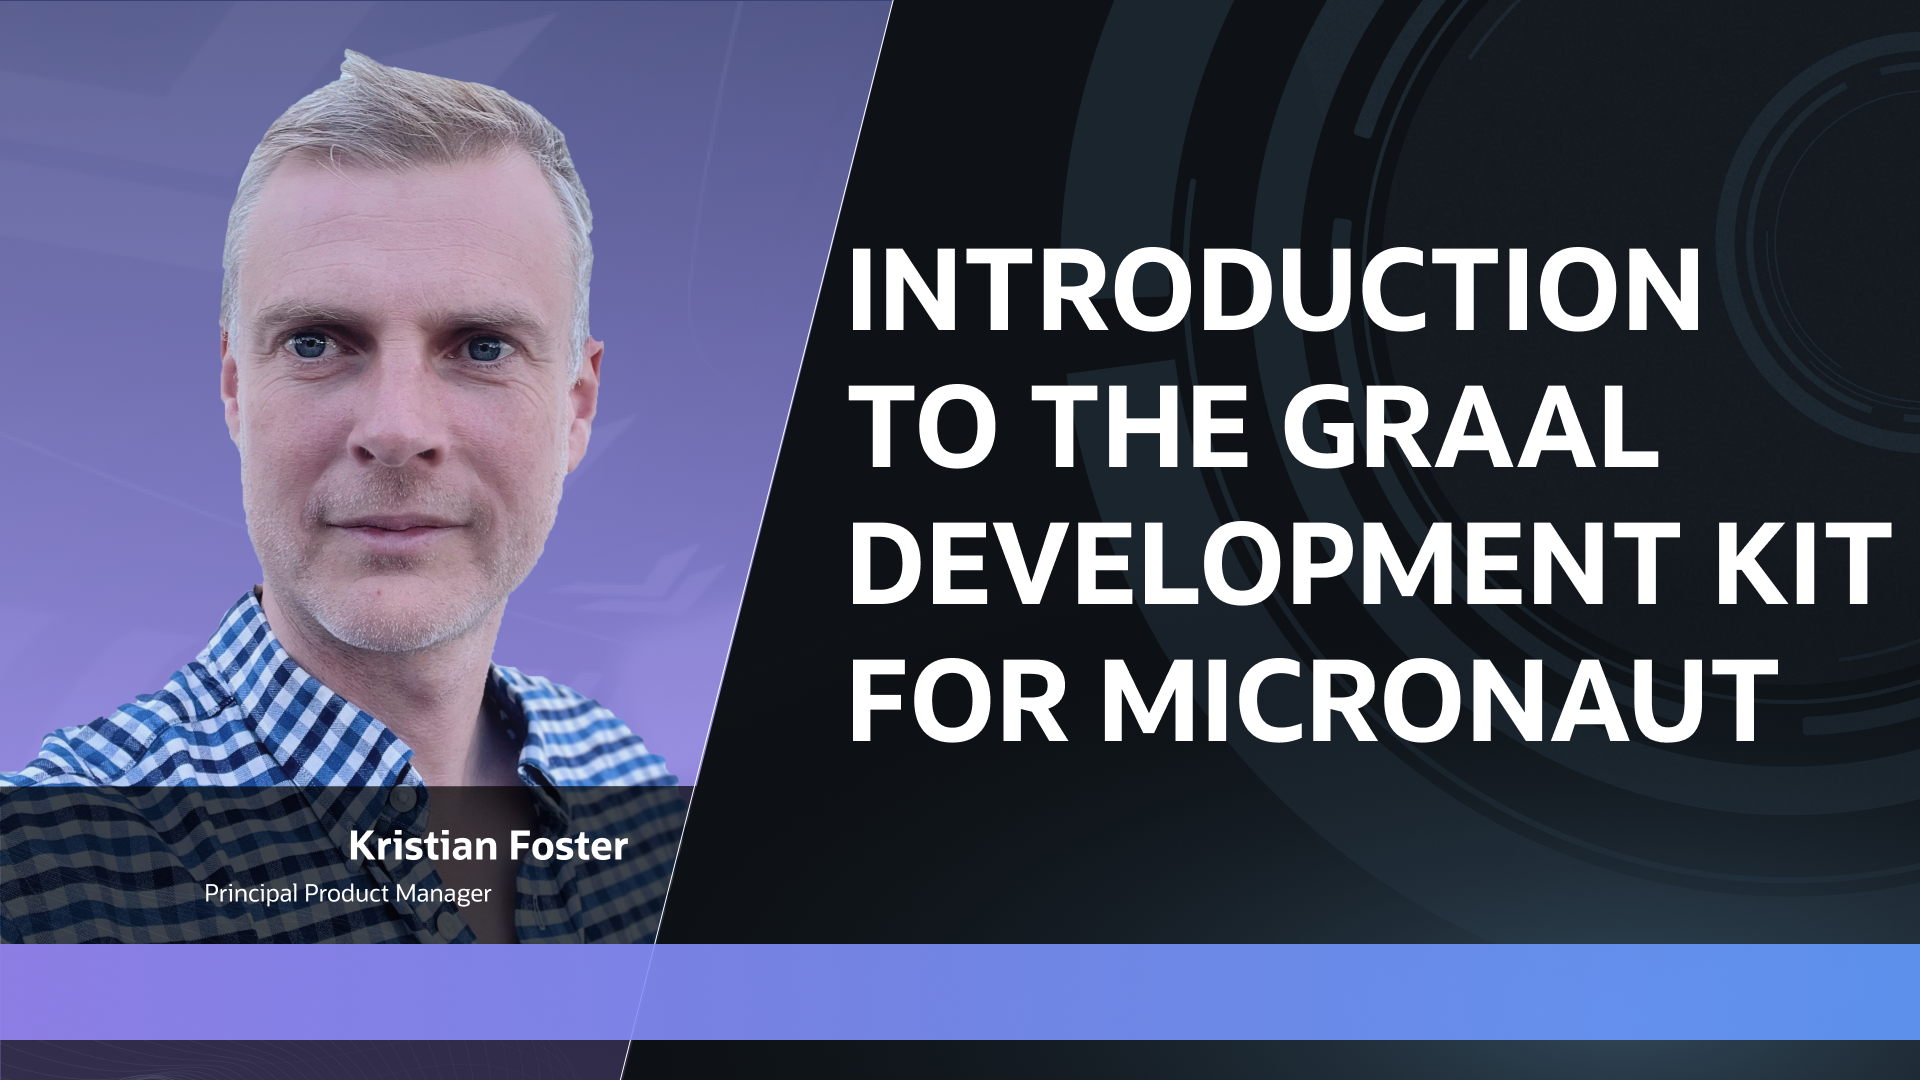 >Introduction to the Graal Development Kit for Micronaut